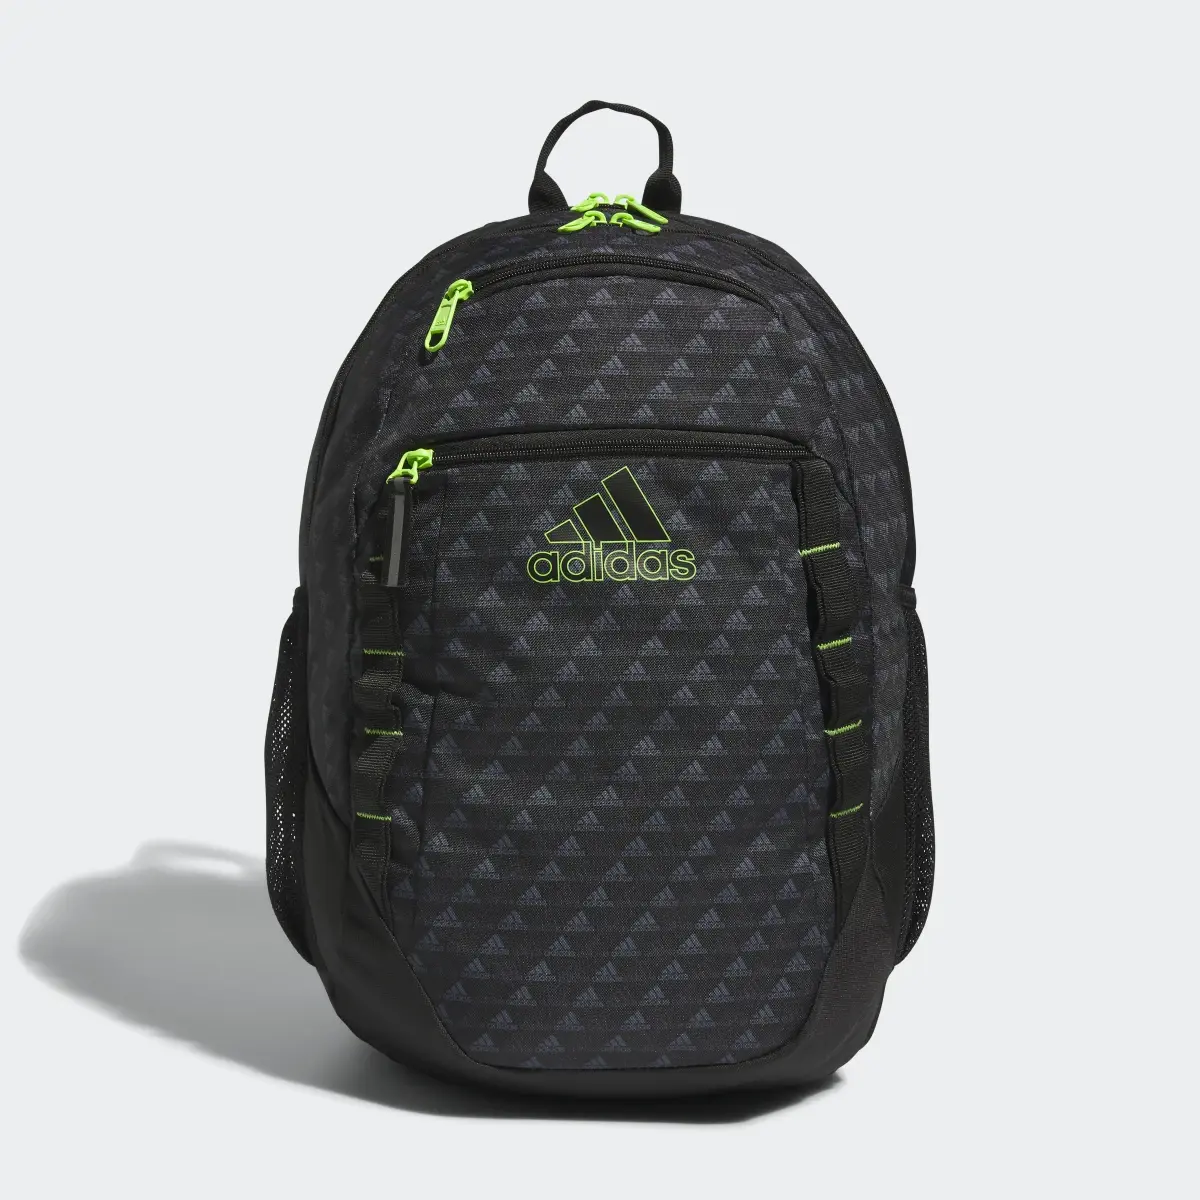 Adidas Excel Backpack. 2